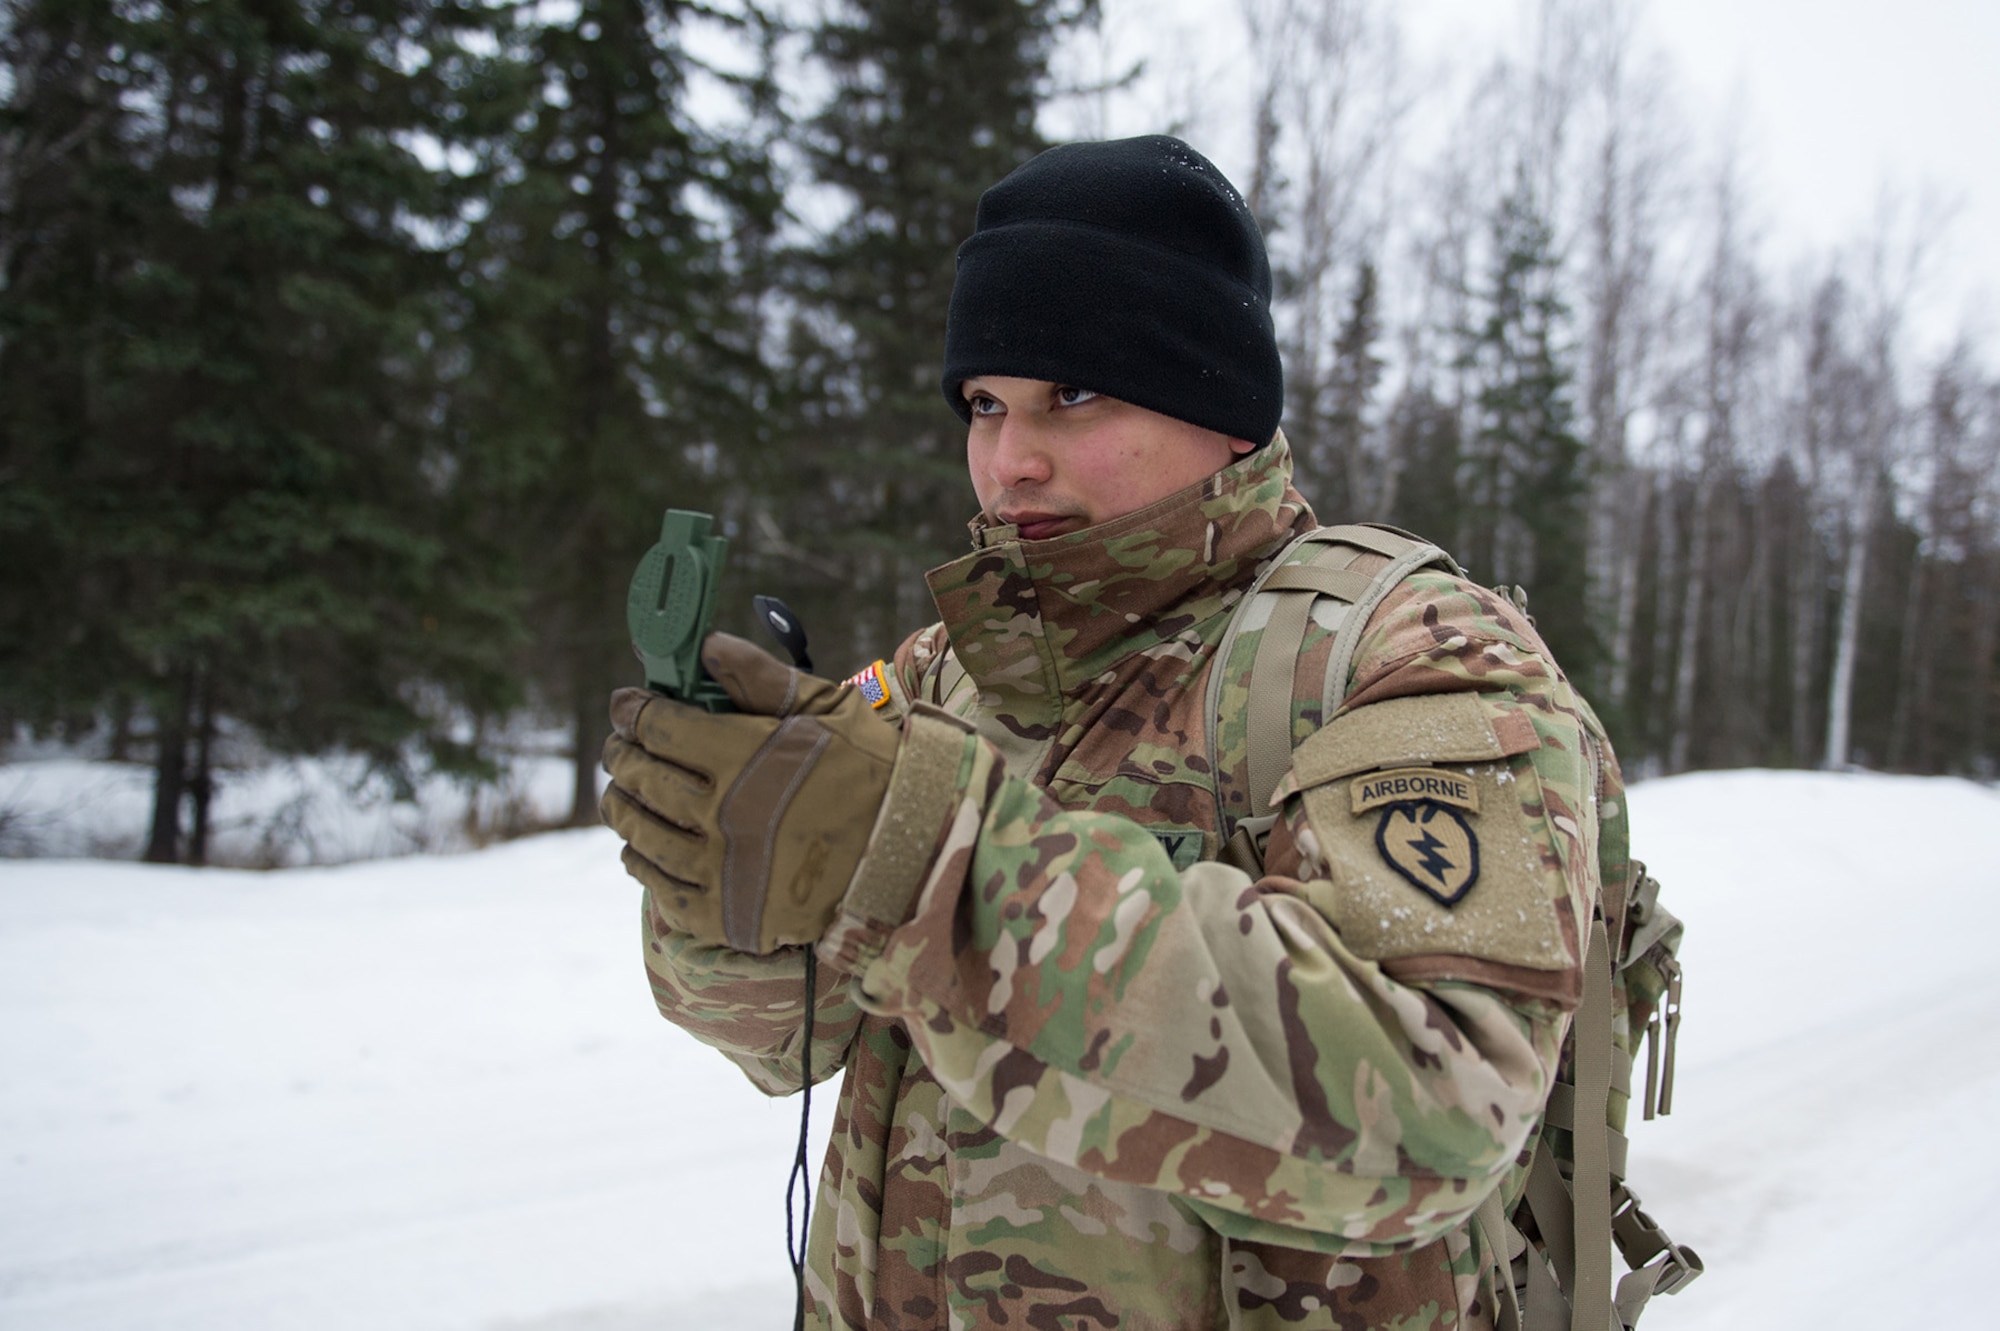 Army Sgt. Carlos Porras, a native of Burlington, NC, assigned to Hawk Company, 3rd Battalion, 509th Parachute Infantry Regiment, 4th Infantry Brigade Combat Team (Airborne), 25th Infantry Division, U.S. Army Alaska, shoots an azimuth with a compass during a land navigation course on Joint Base Elmendorf-Richardson, Alaska, April 4, 2018.  The Soldiers used their skills to plot courses using a lensatic compass, protractor, and a 1:25,000 scale map to navigate to, and locate points using provided grid coordinates within a predetermined time.